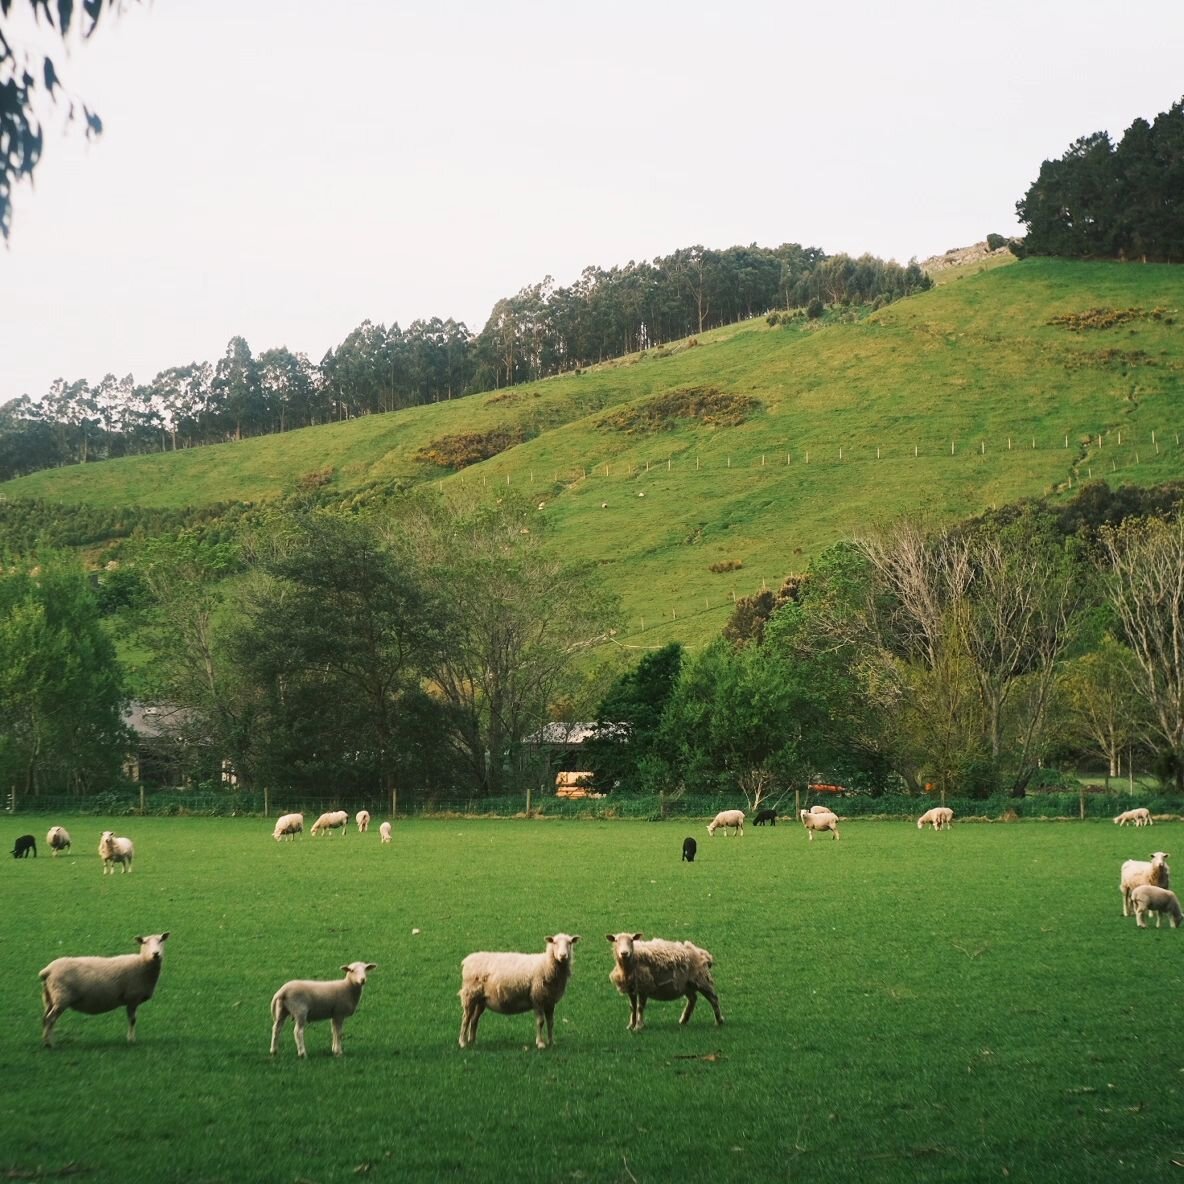 9 days back in Aotearoa New Zealand.

Sheep. Lush greens. Spring blossoms. Turquoise waters. Camila. Old friends. New friends. Connection. Elements. Fire. Community. 

Not pictured but felt: exhaustion, elation, sadness, thrill, disappointment, uncer